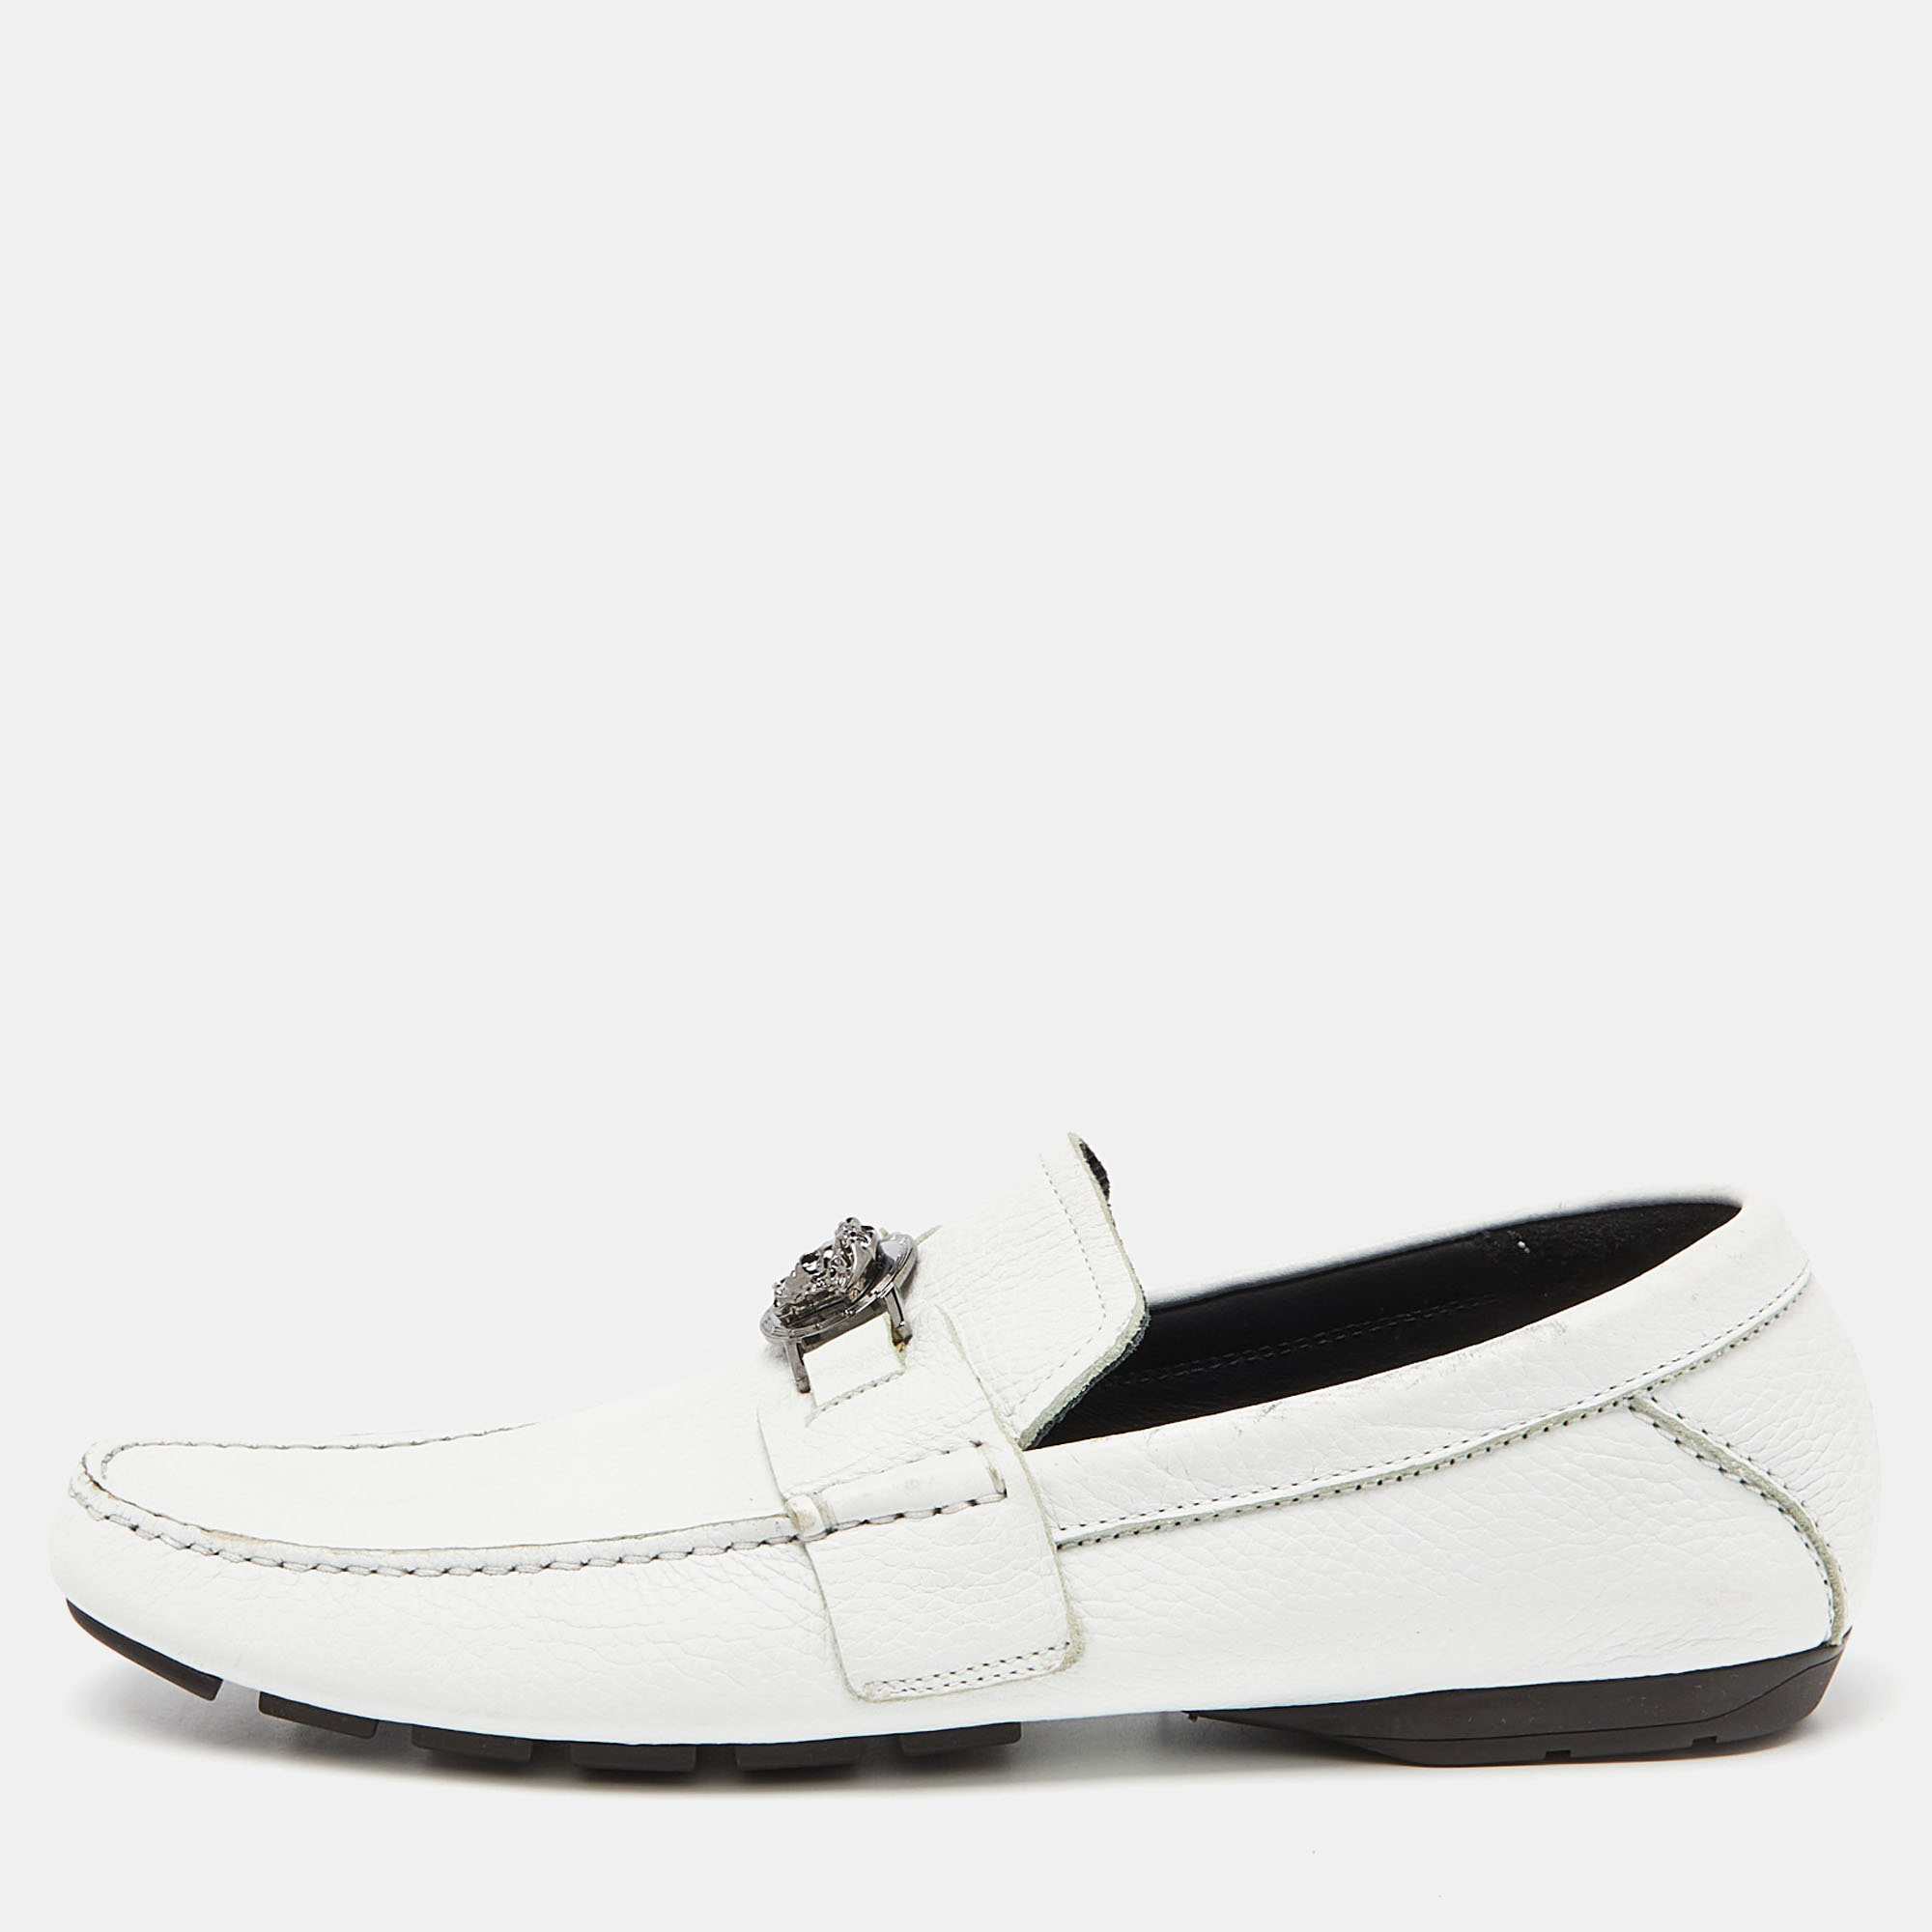 Pre-owned Versace White Leather Medusa Detail Slip On Loafers Size 43